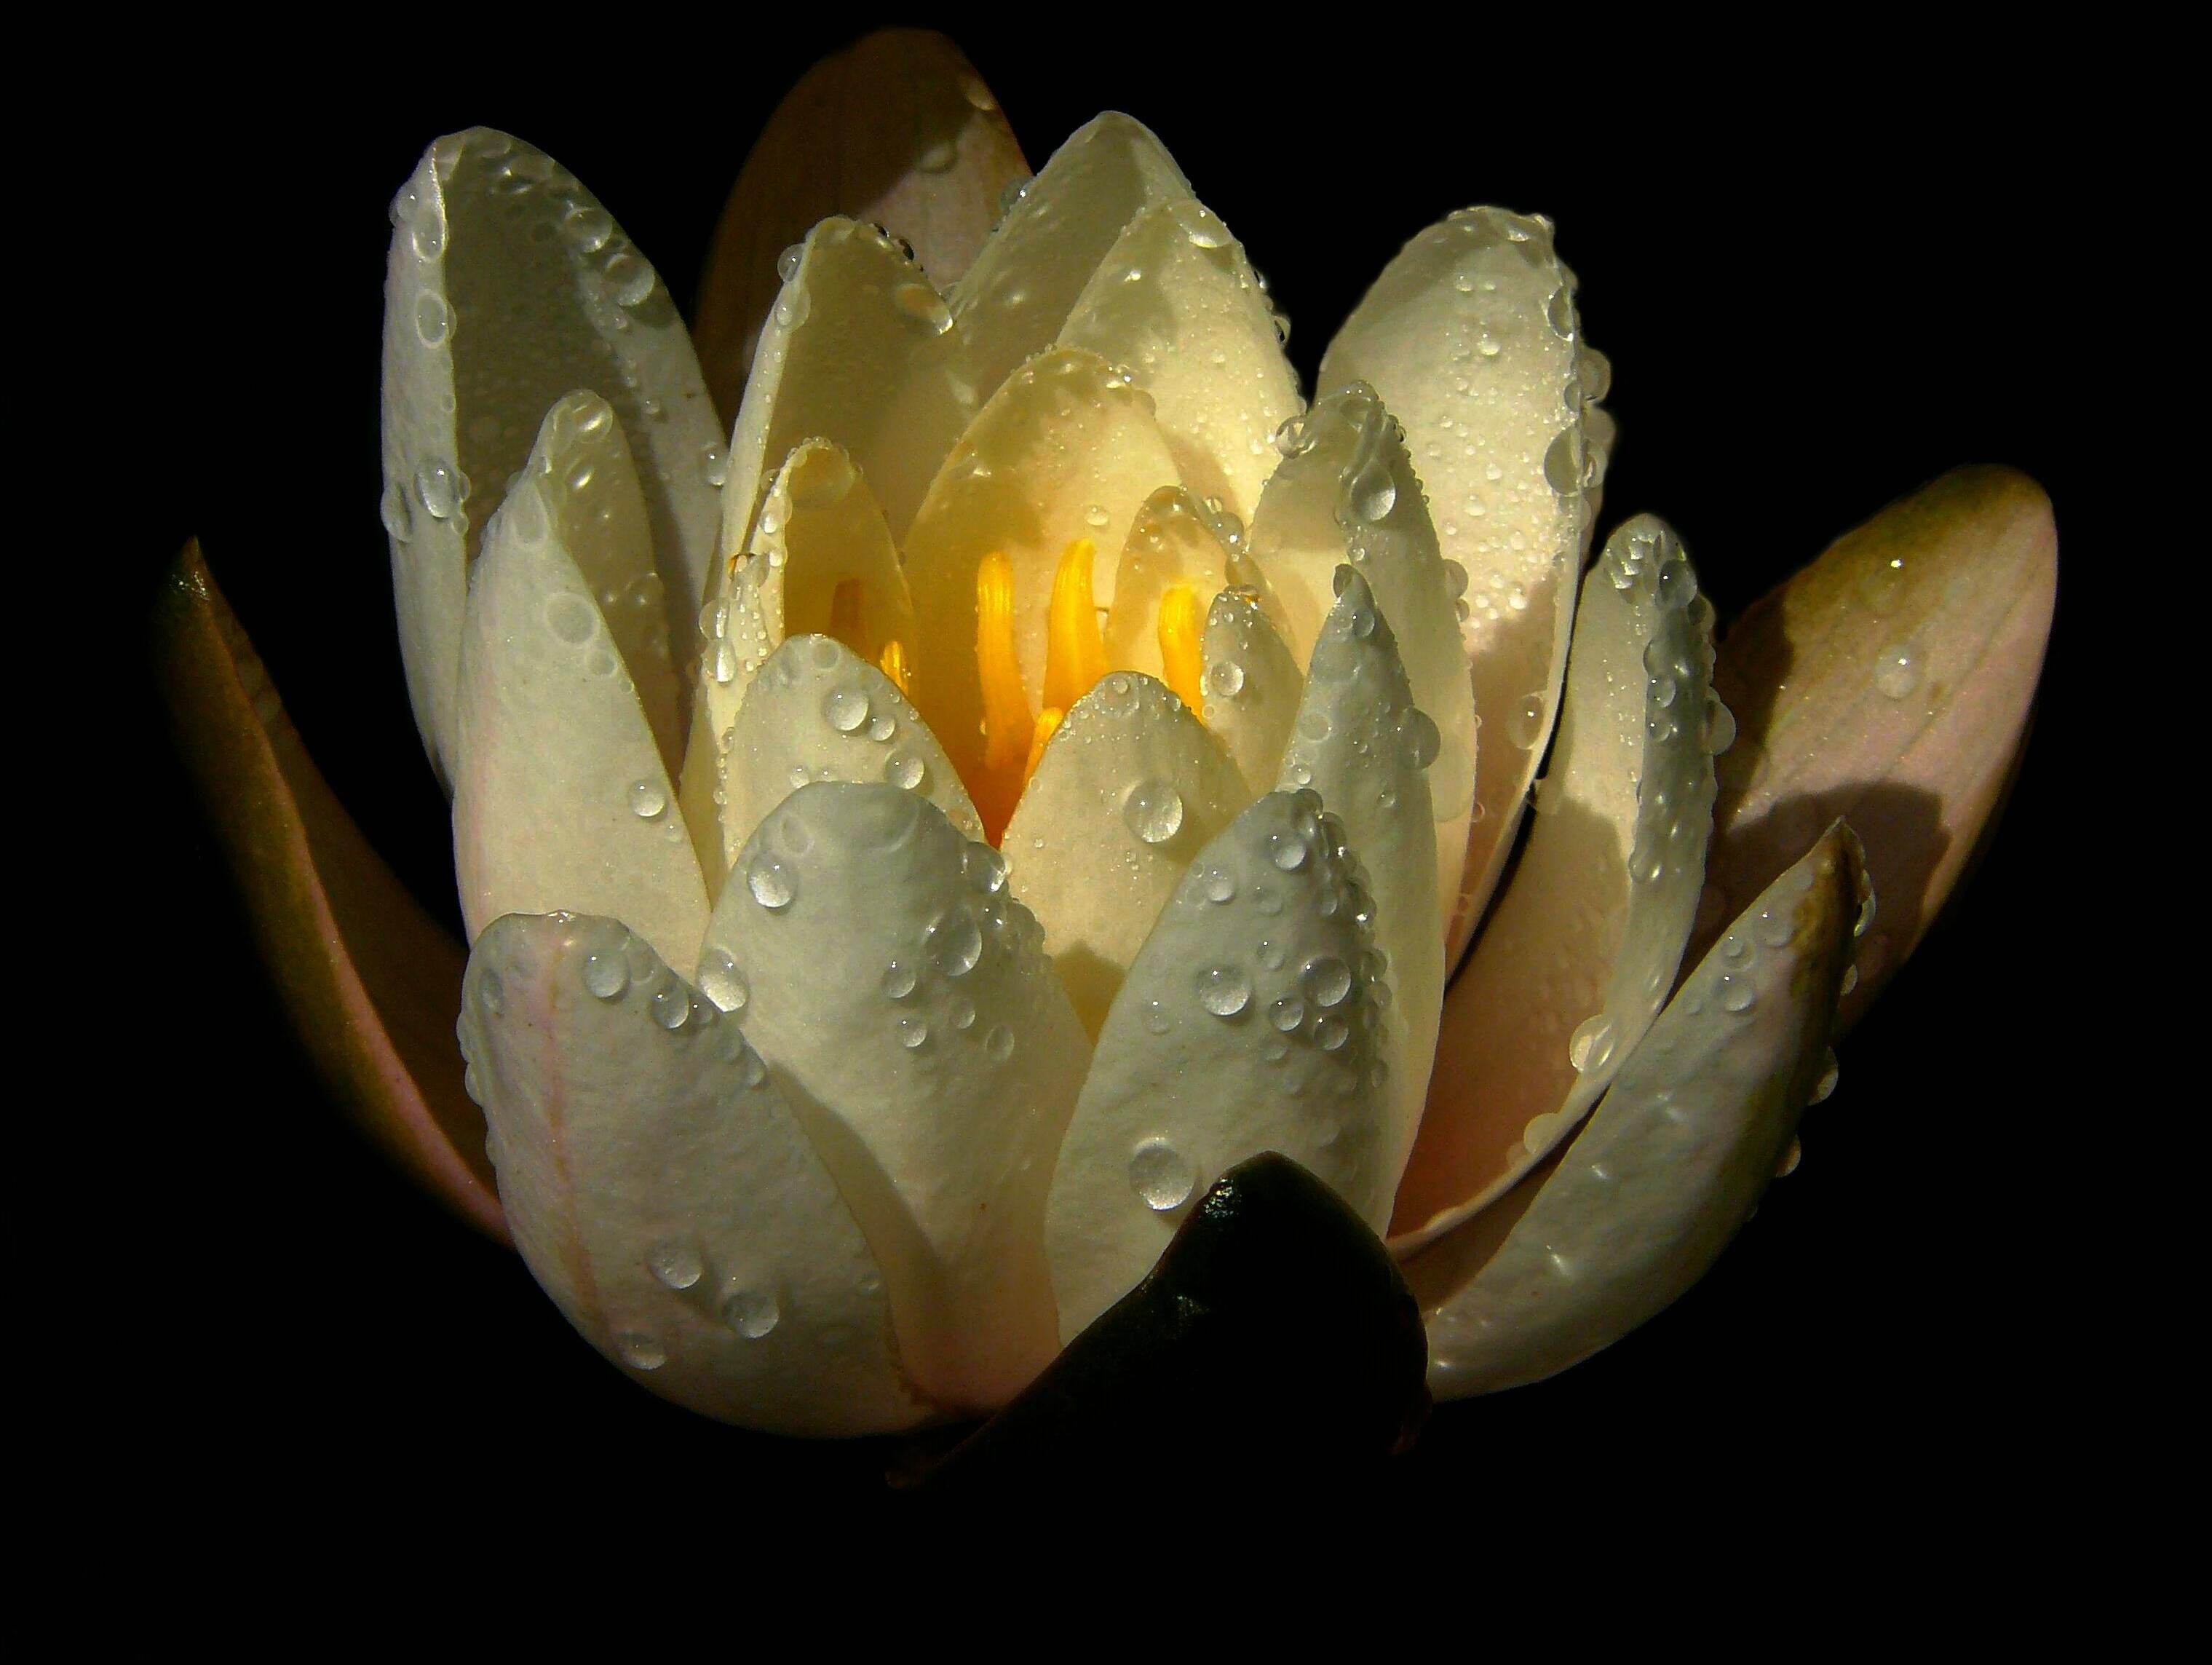 petals, flowers, drops, water lily phone background